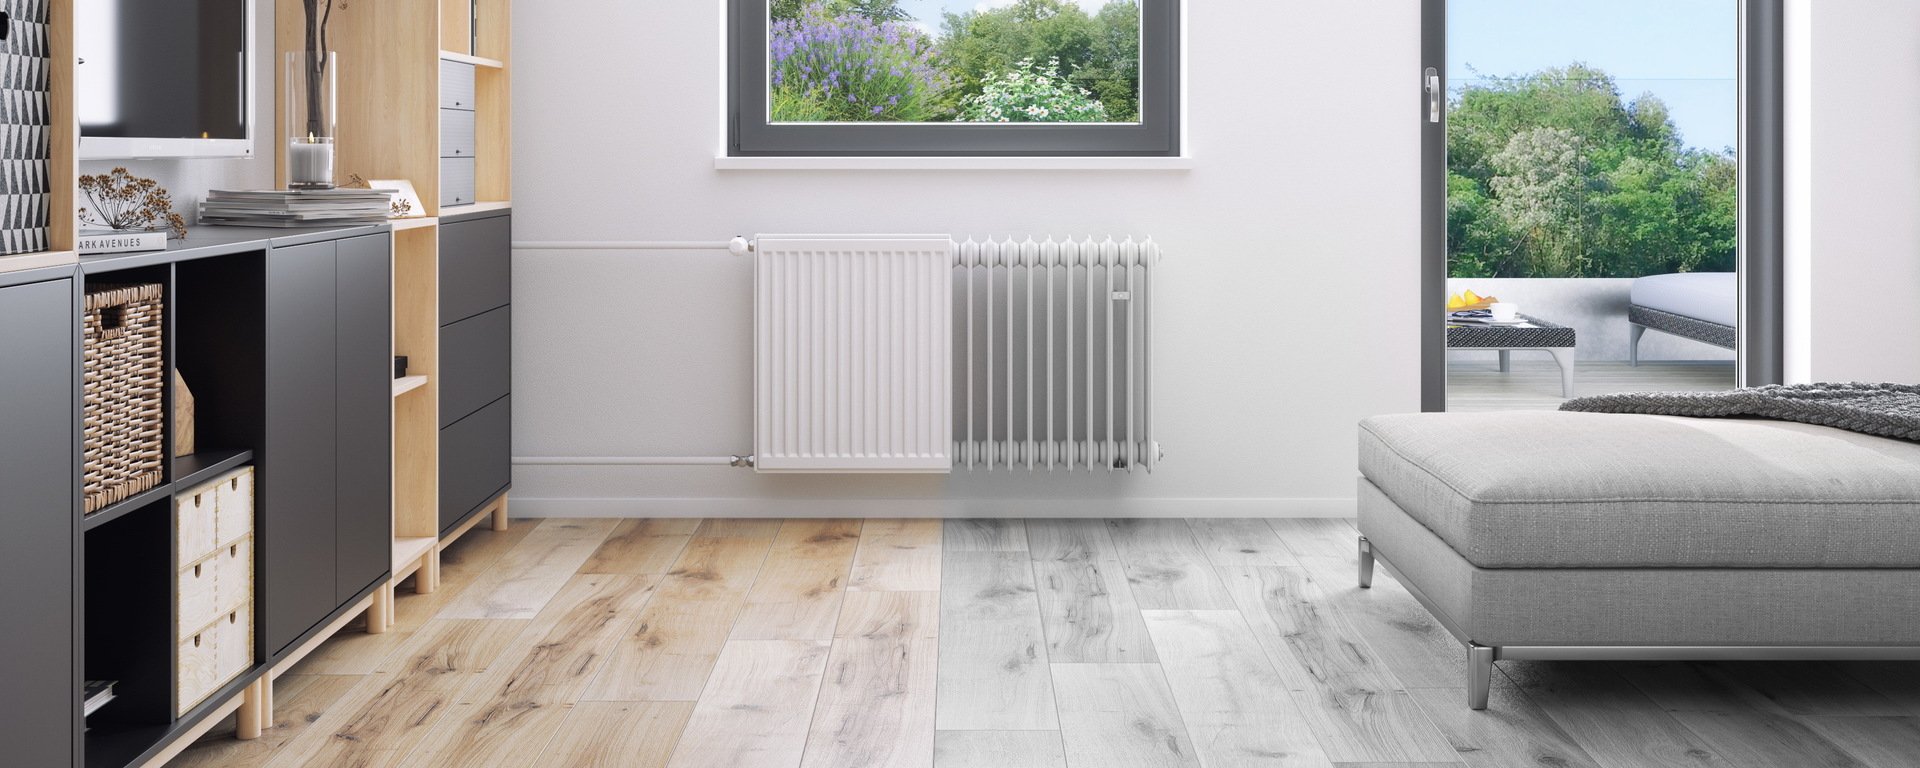 A radiator for quick renovation